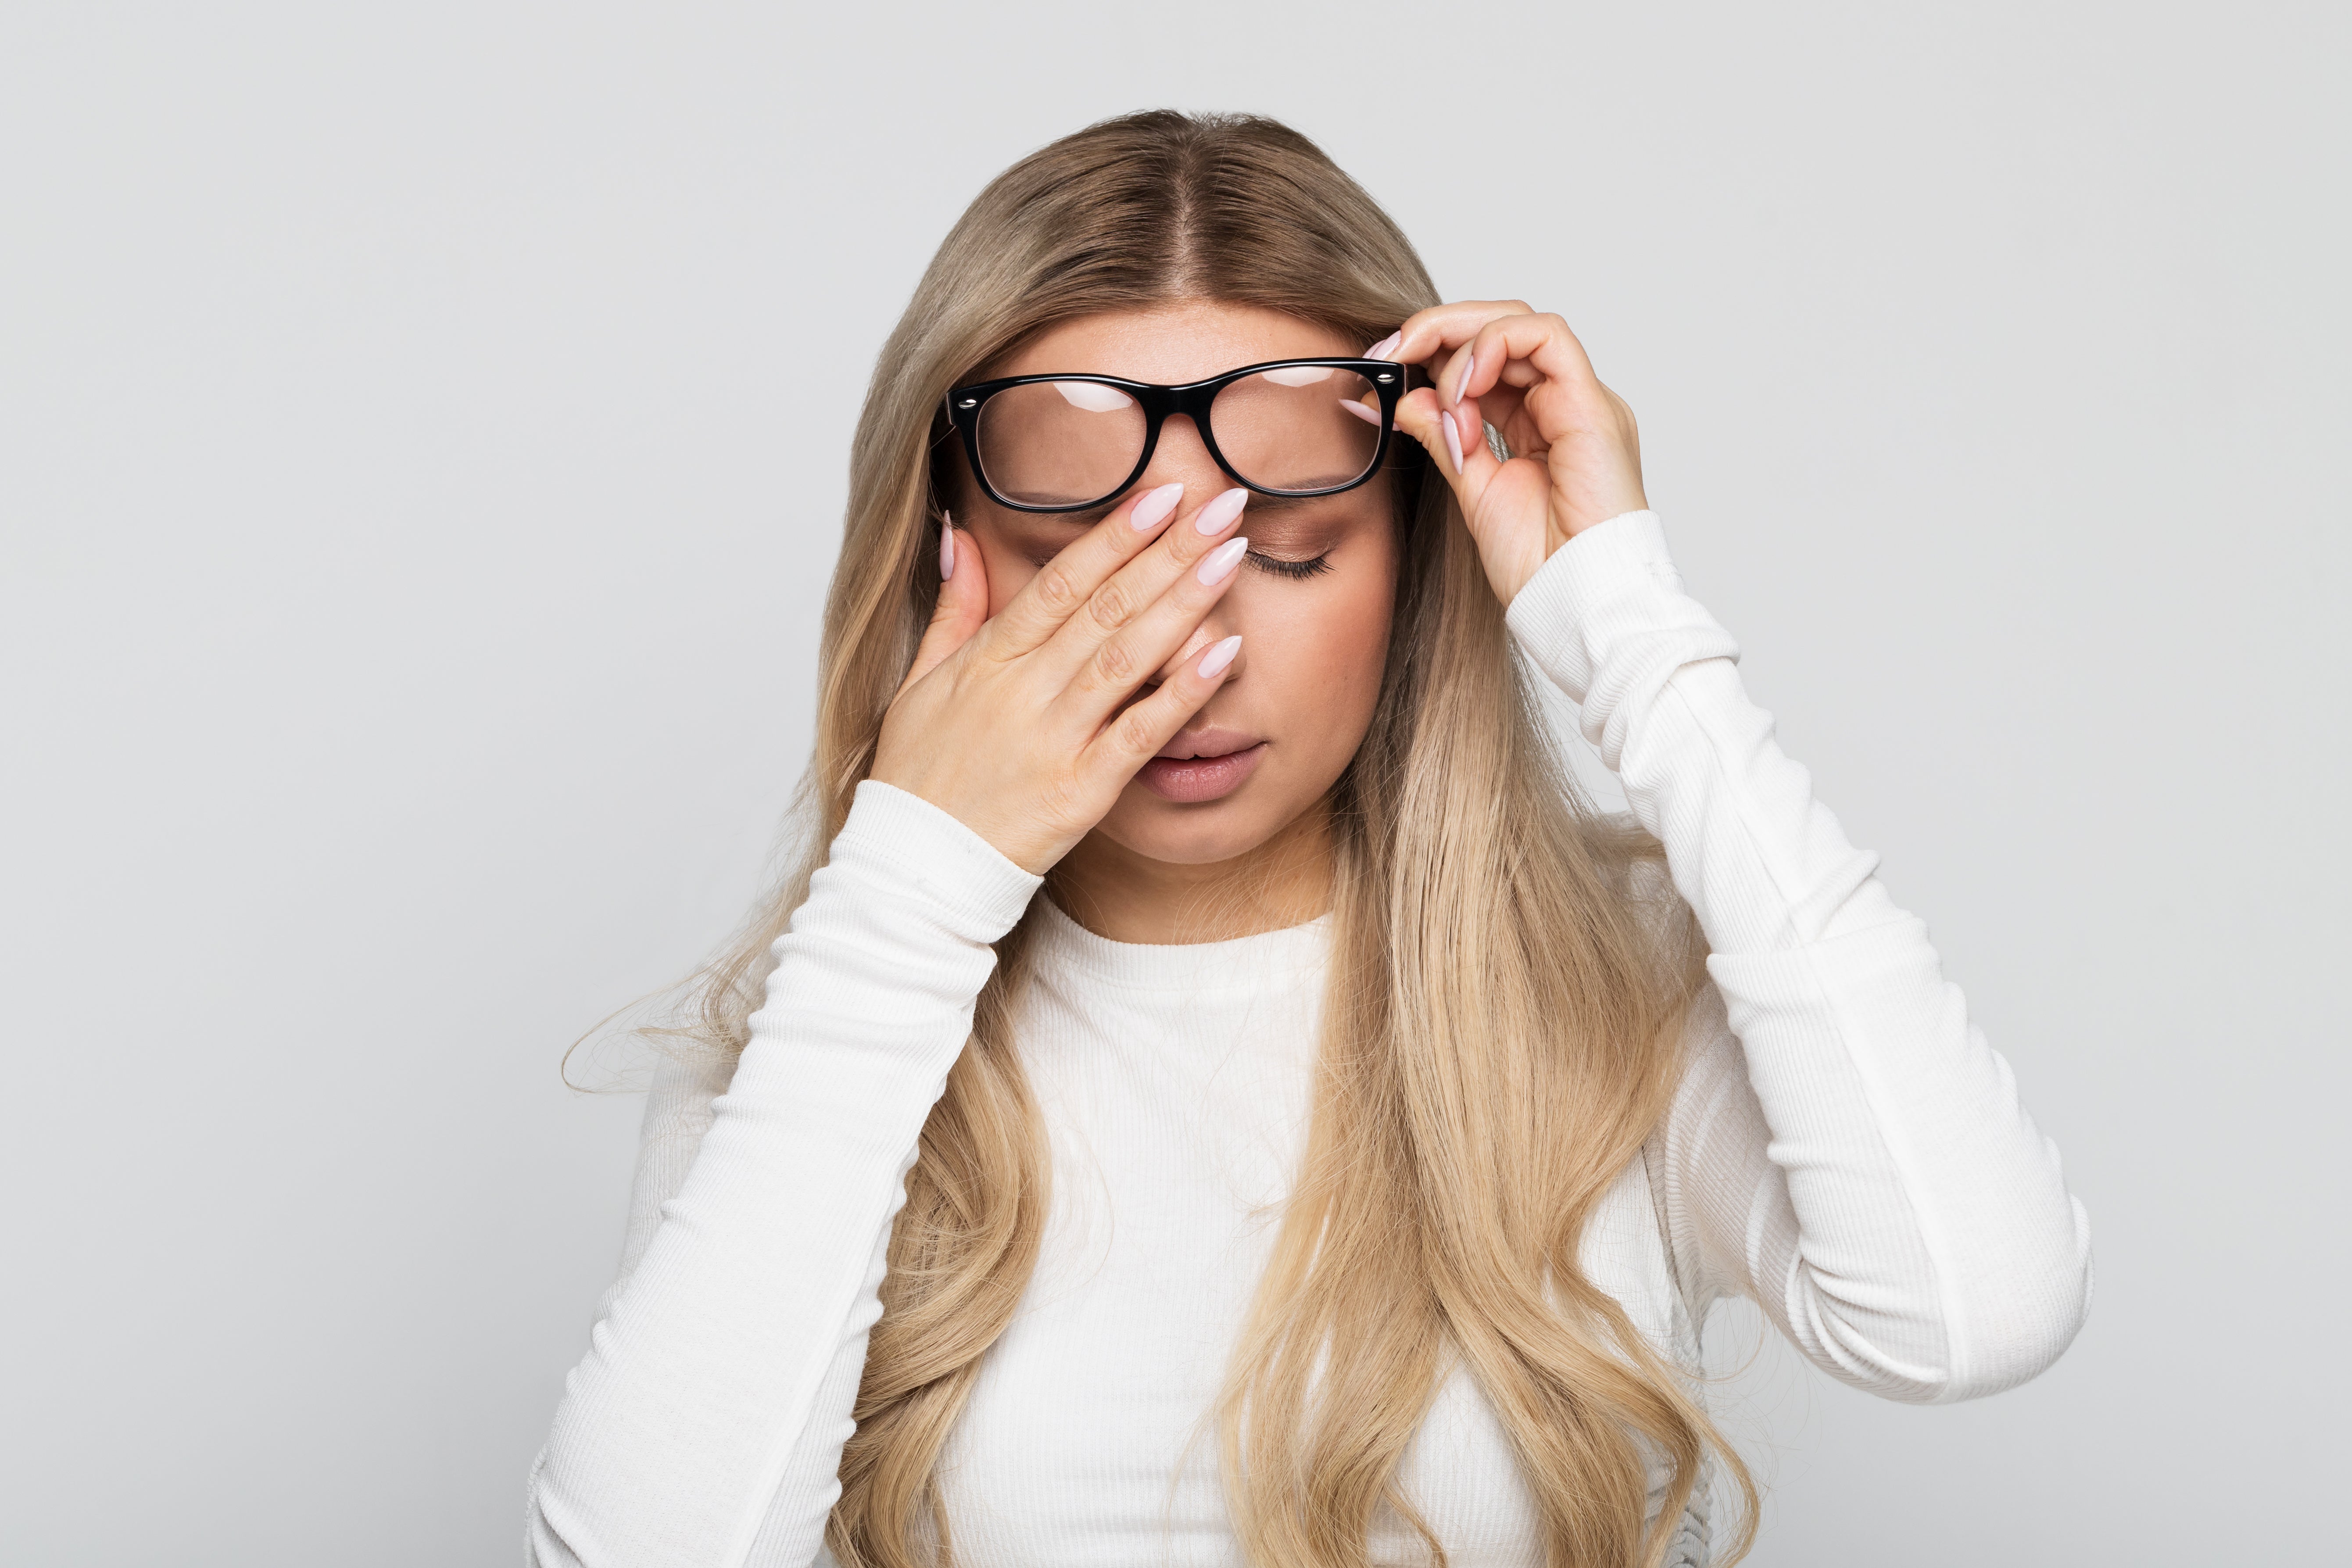 How to treat dry and swollen eyelids